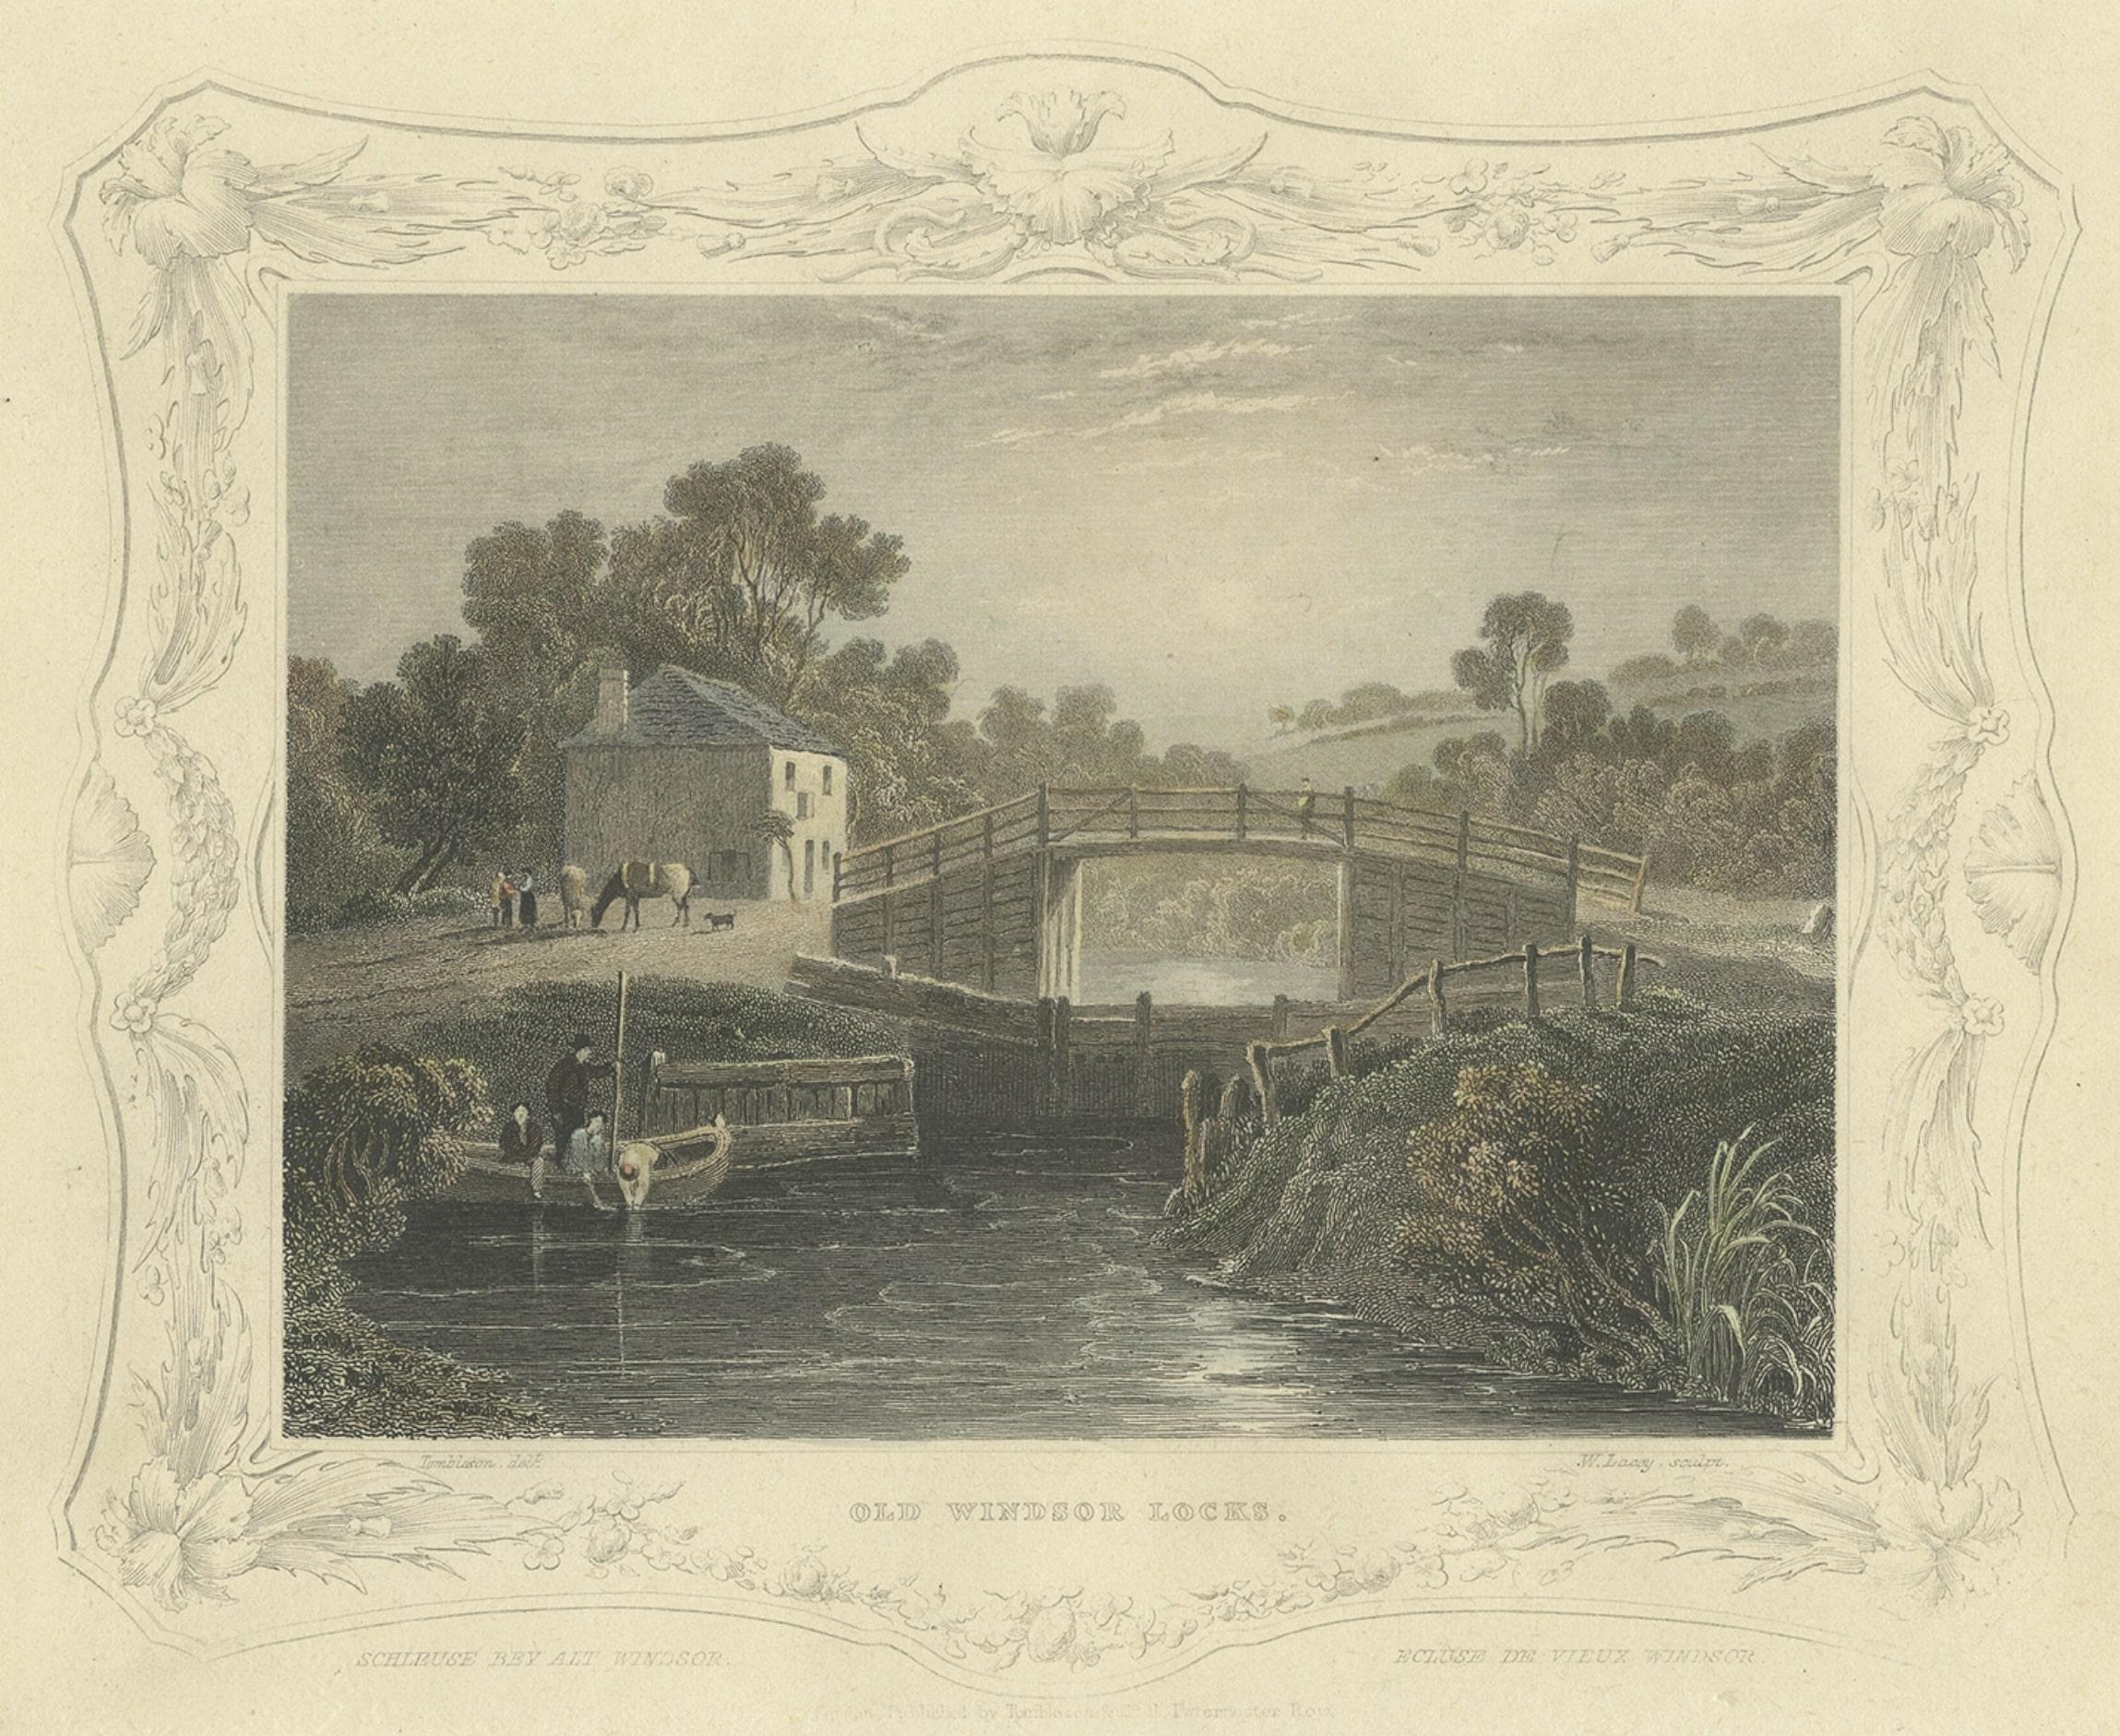 Antique Print of Old Windsor Lock, on the River Thames in England, 1834